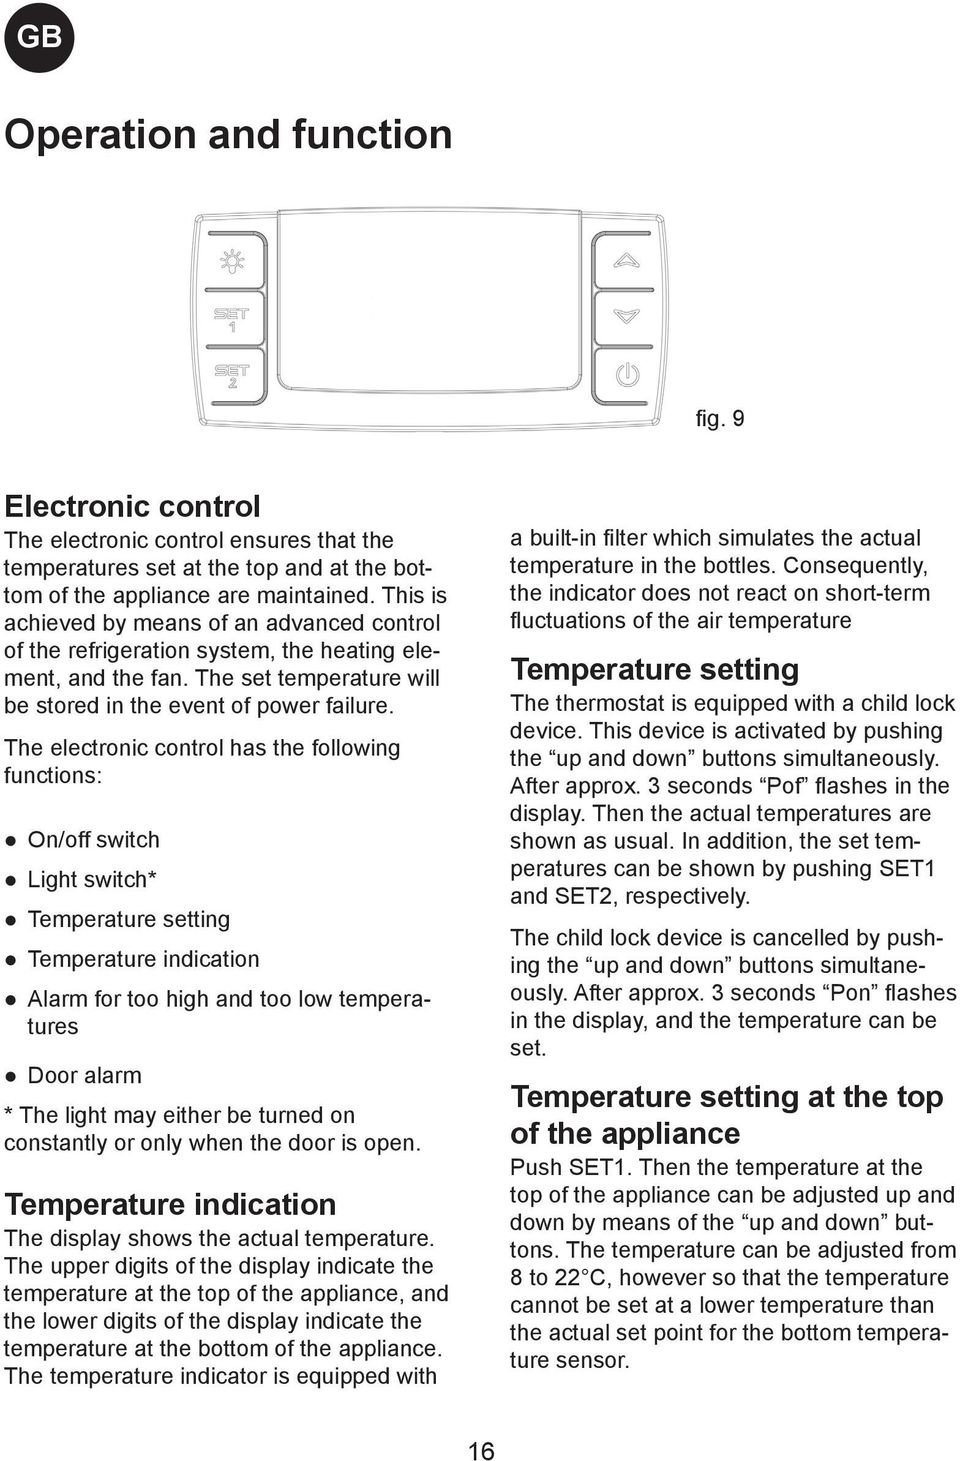 The electronic control has the following functions: On/off switch Light switch* Temperature setting Temperature indication Alarm for too high and too low temperatures Door alarm * The light may